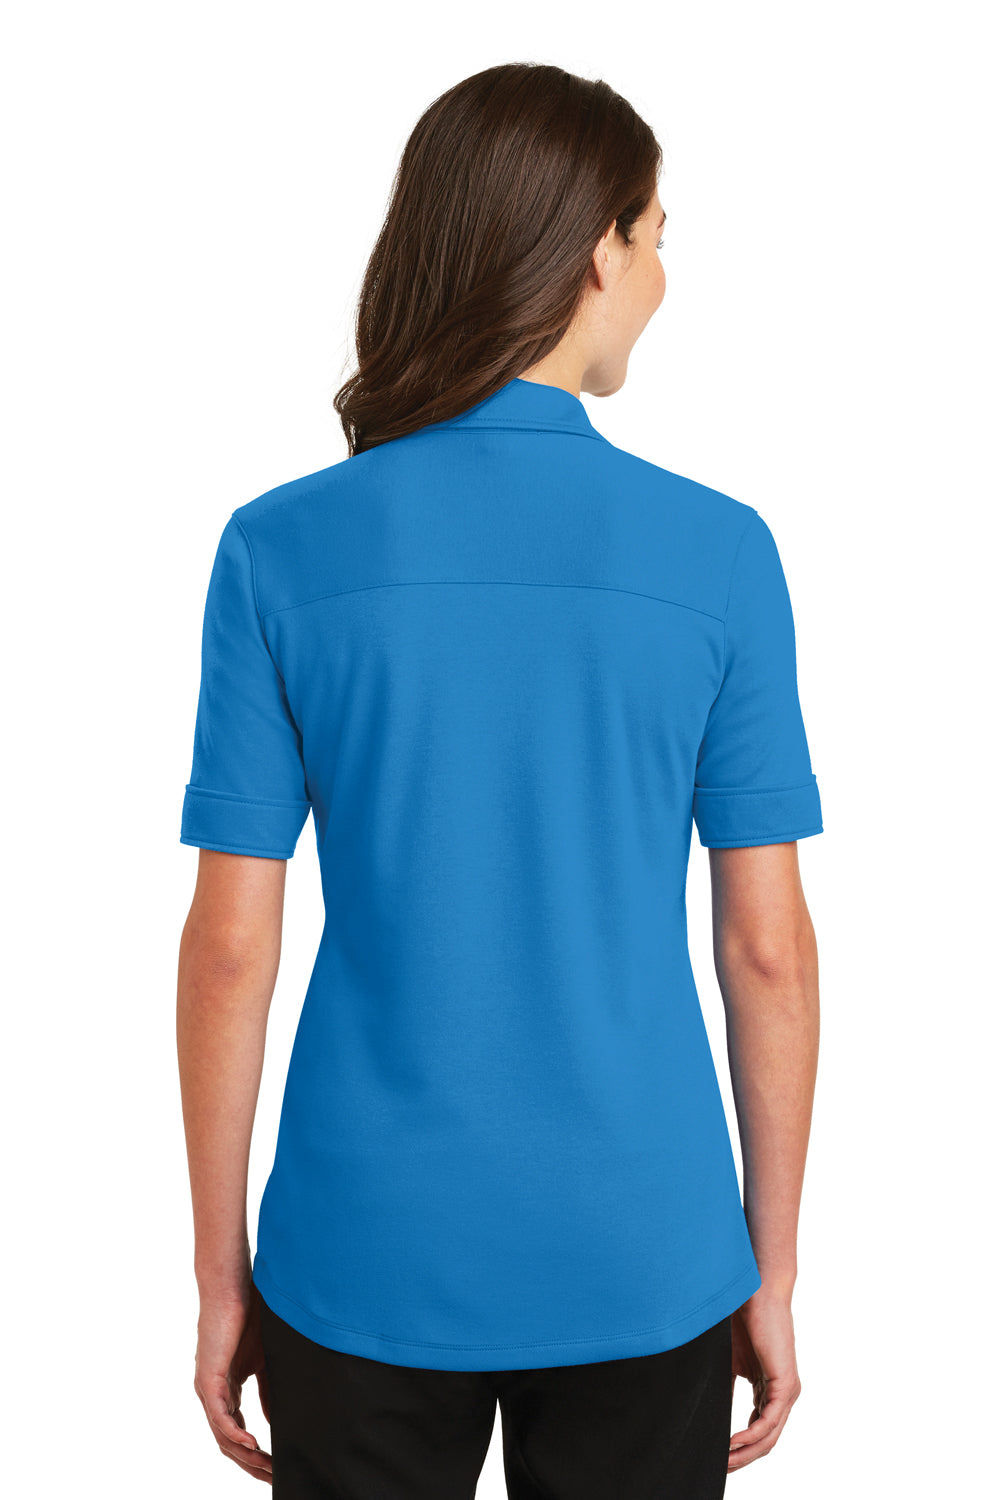 Port Authority L5200 Womens Silk Touch Performance Moisture Wicking Short Sleeve Polo Shirt Brilliant Blue Back